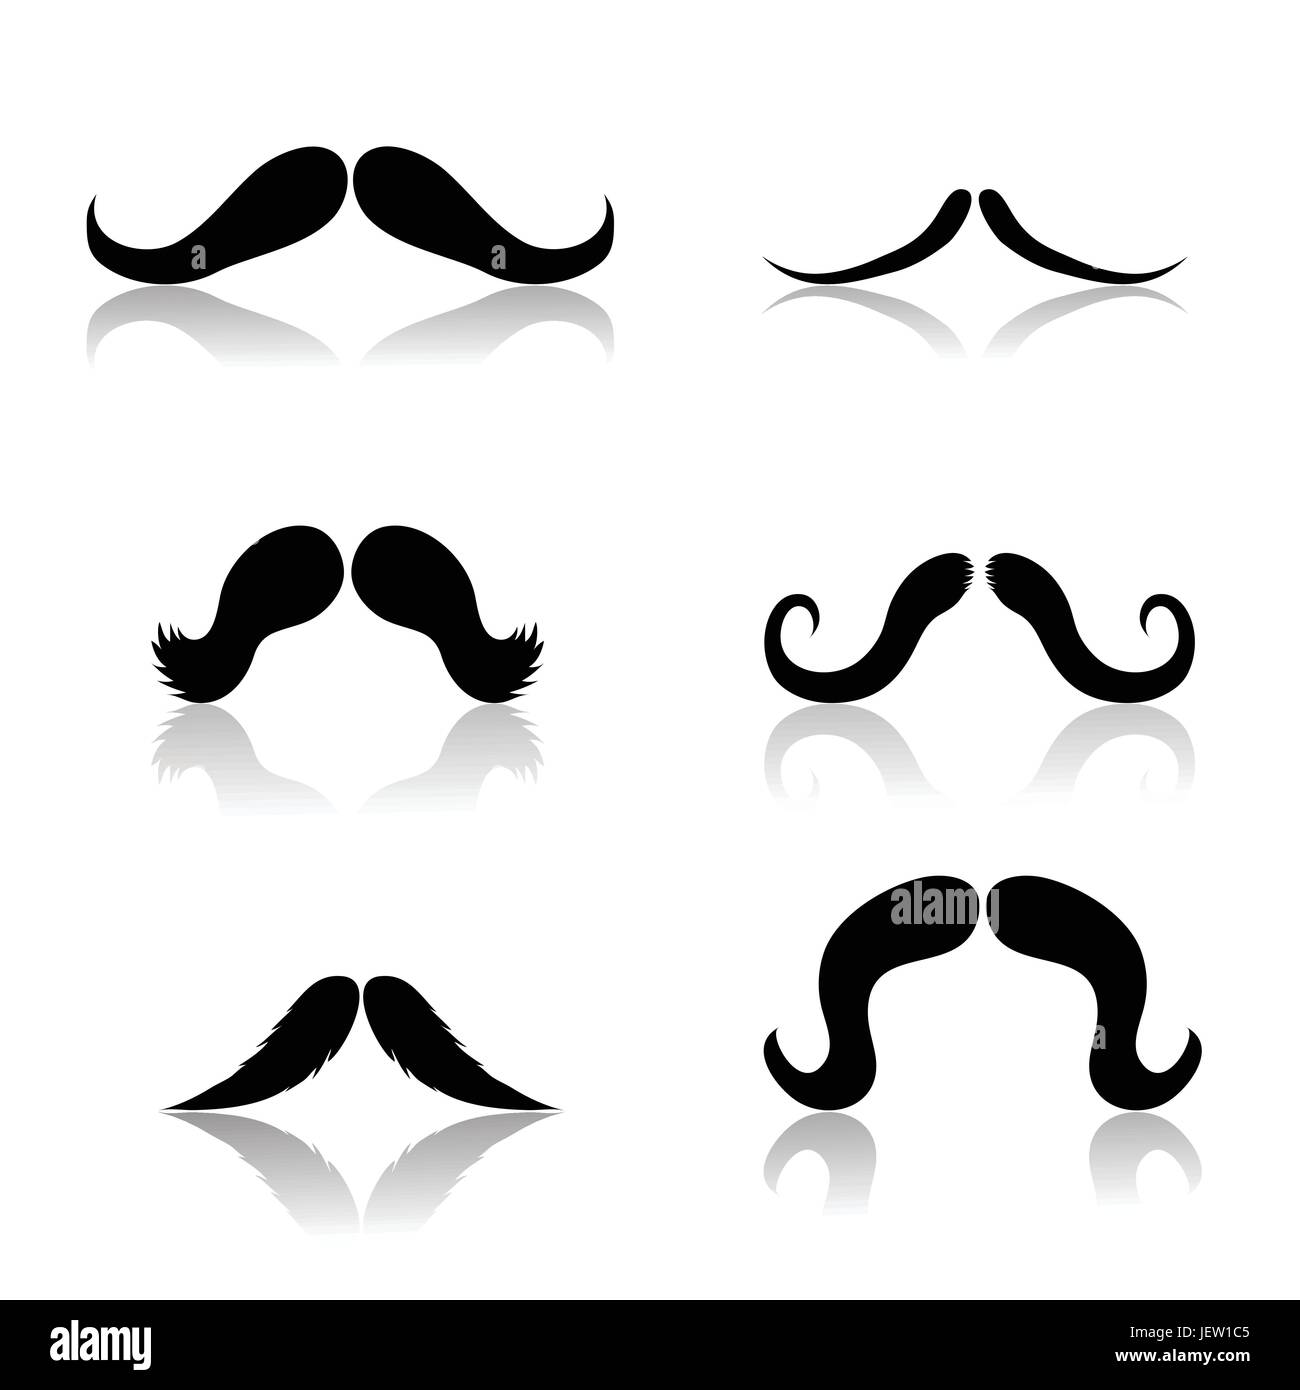 object, silhouette, moustache, set, white, man, style, object, isolated, Stock Vector